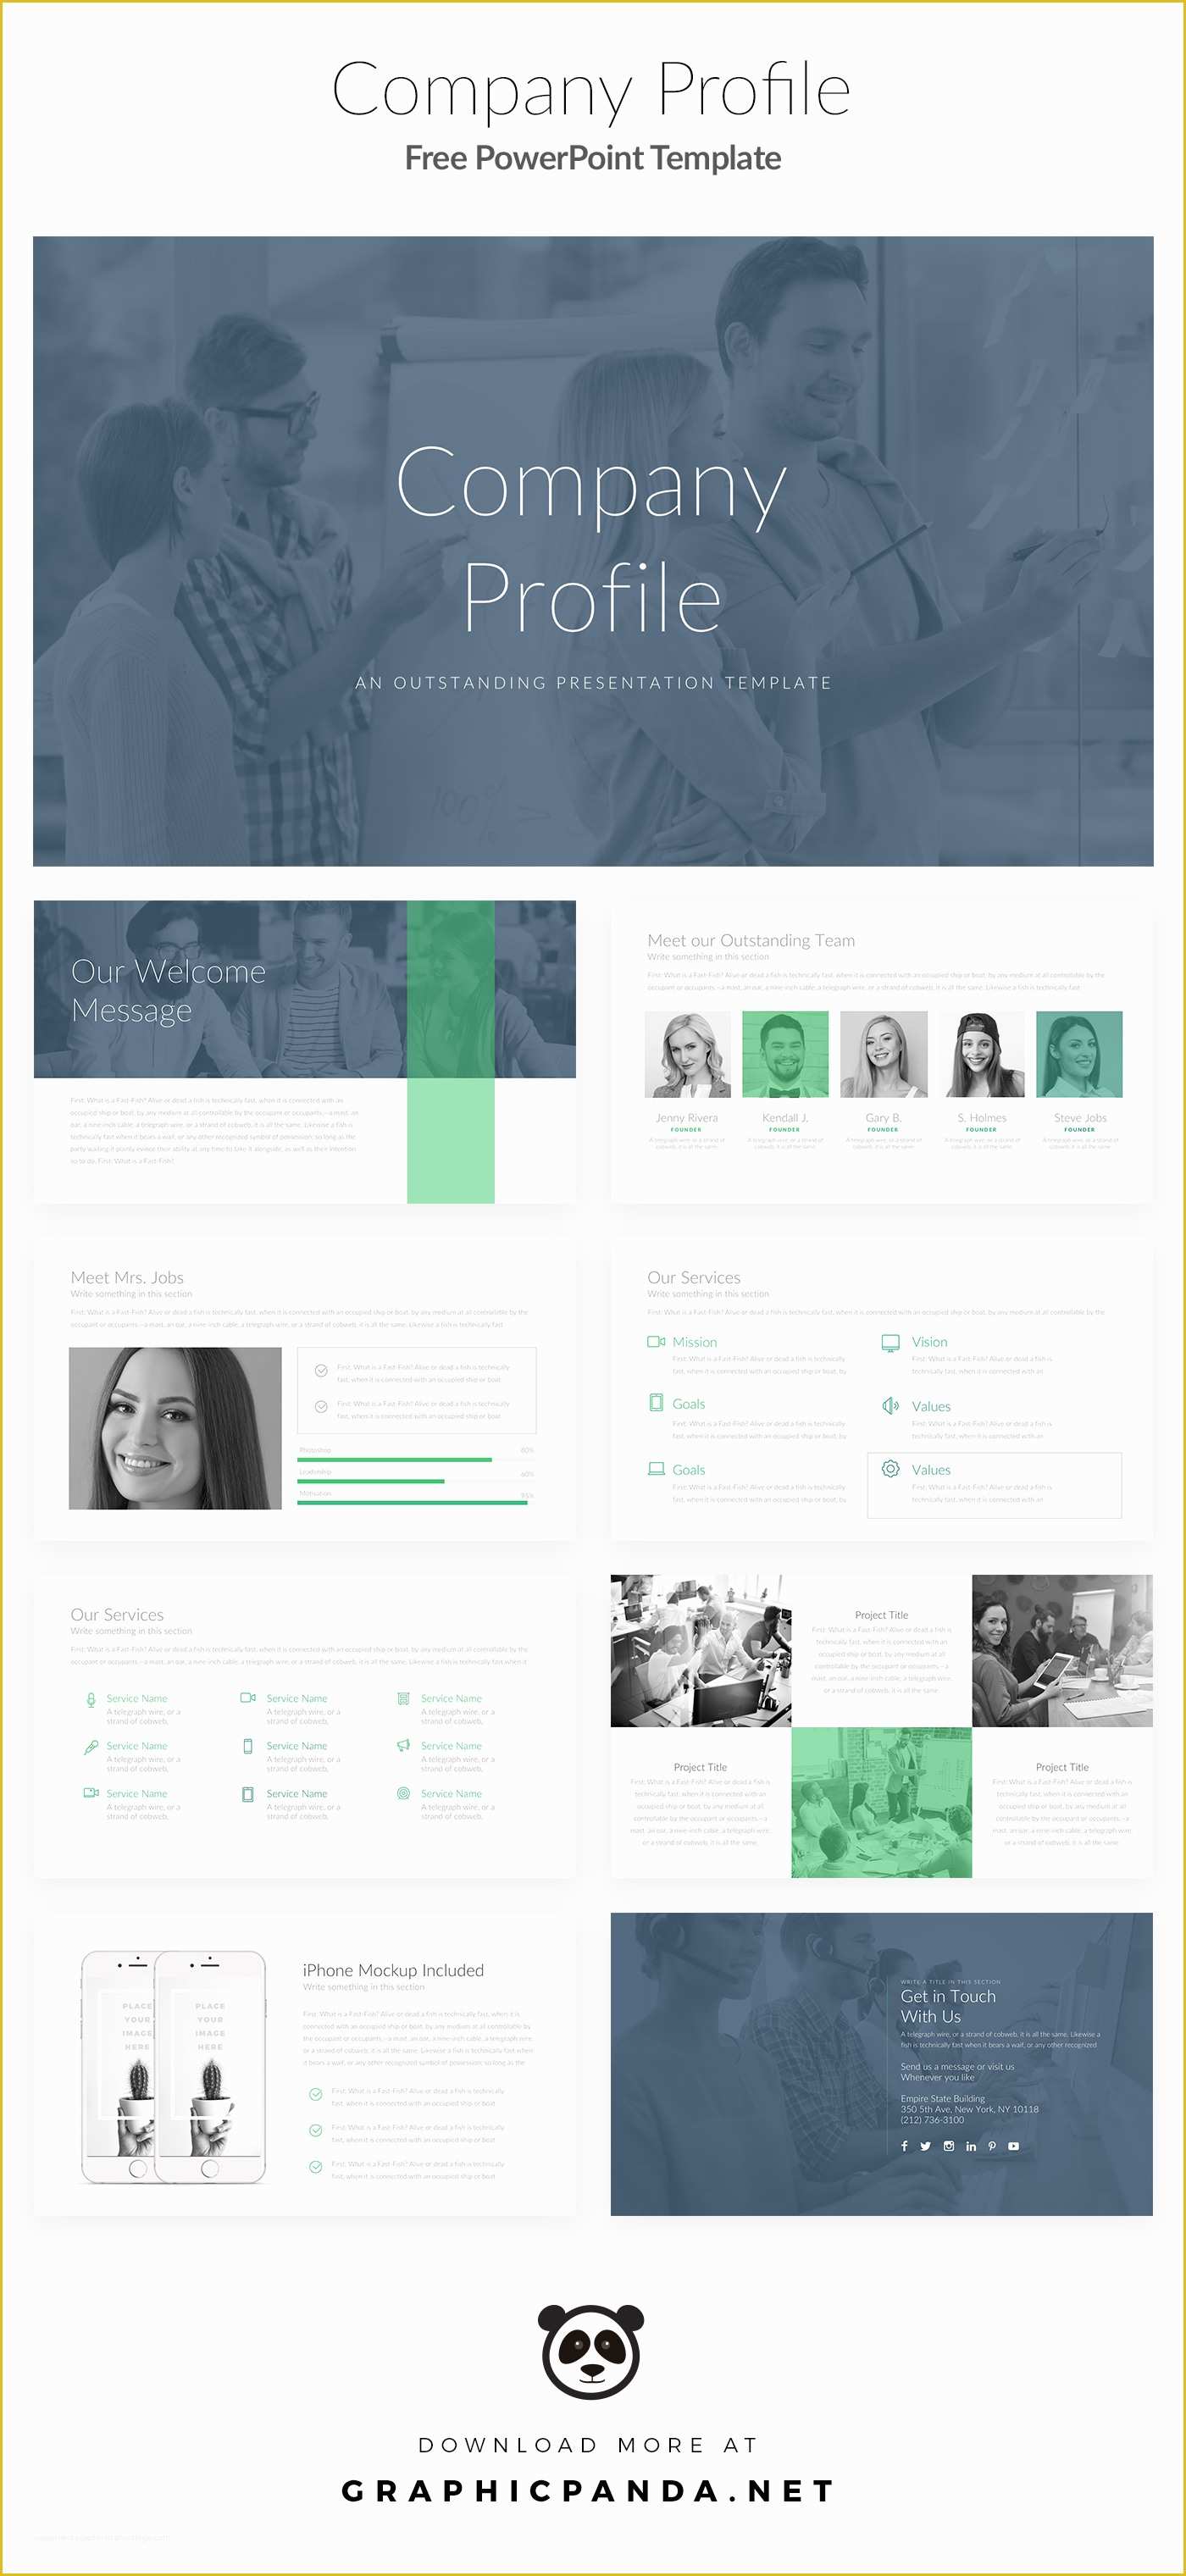 Company Profile Template Powerpoint Free Download Of Free Download Pany Profile Powerpoint Template